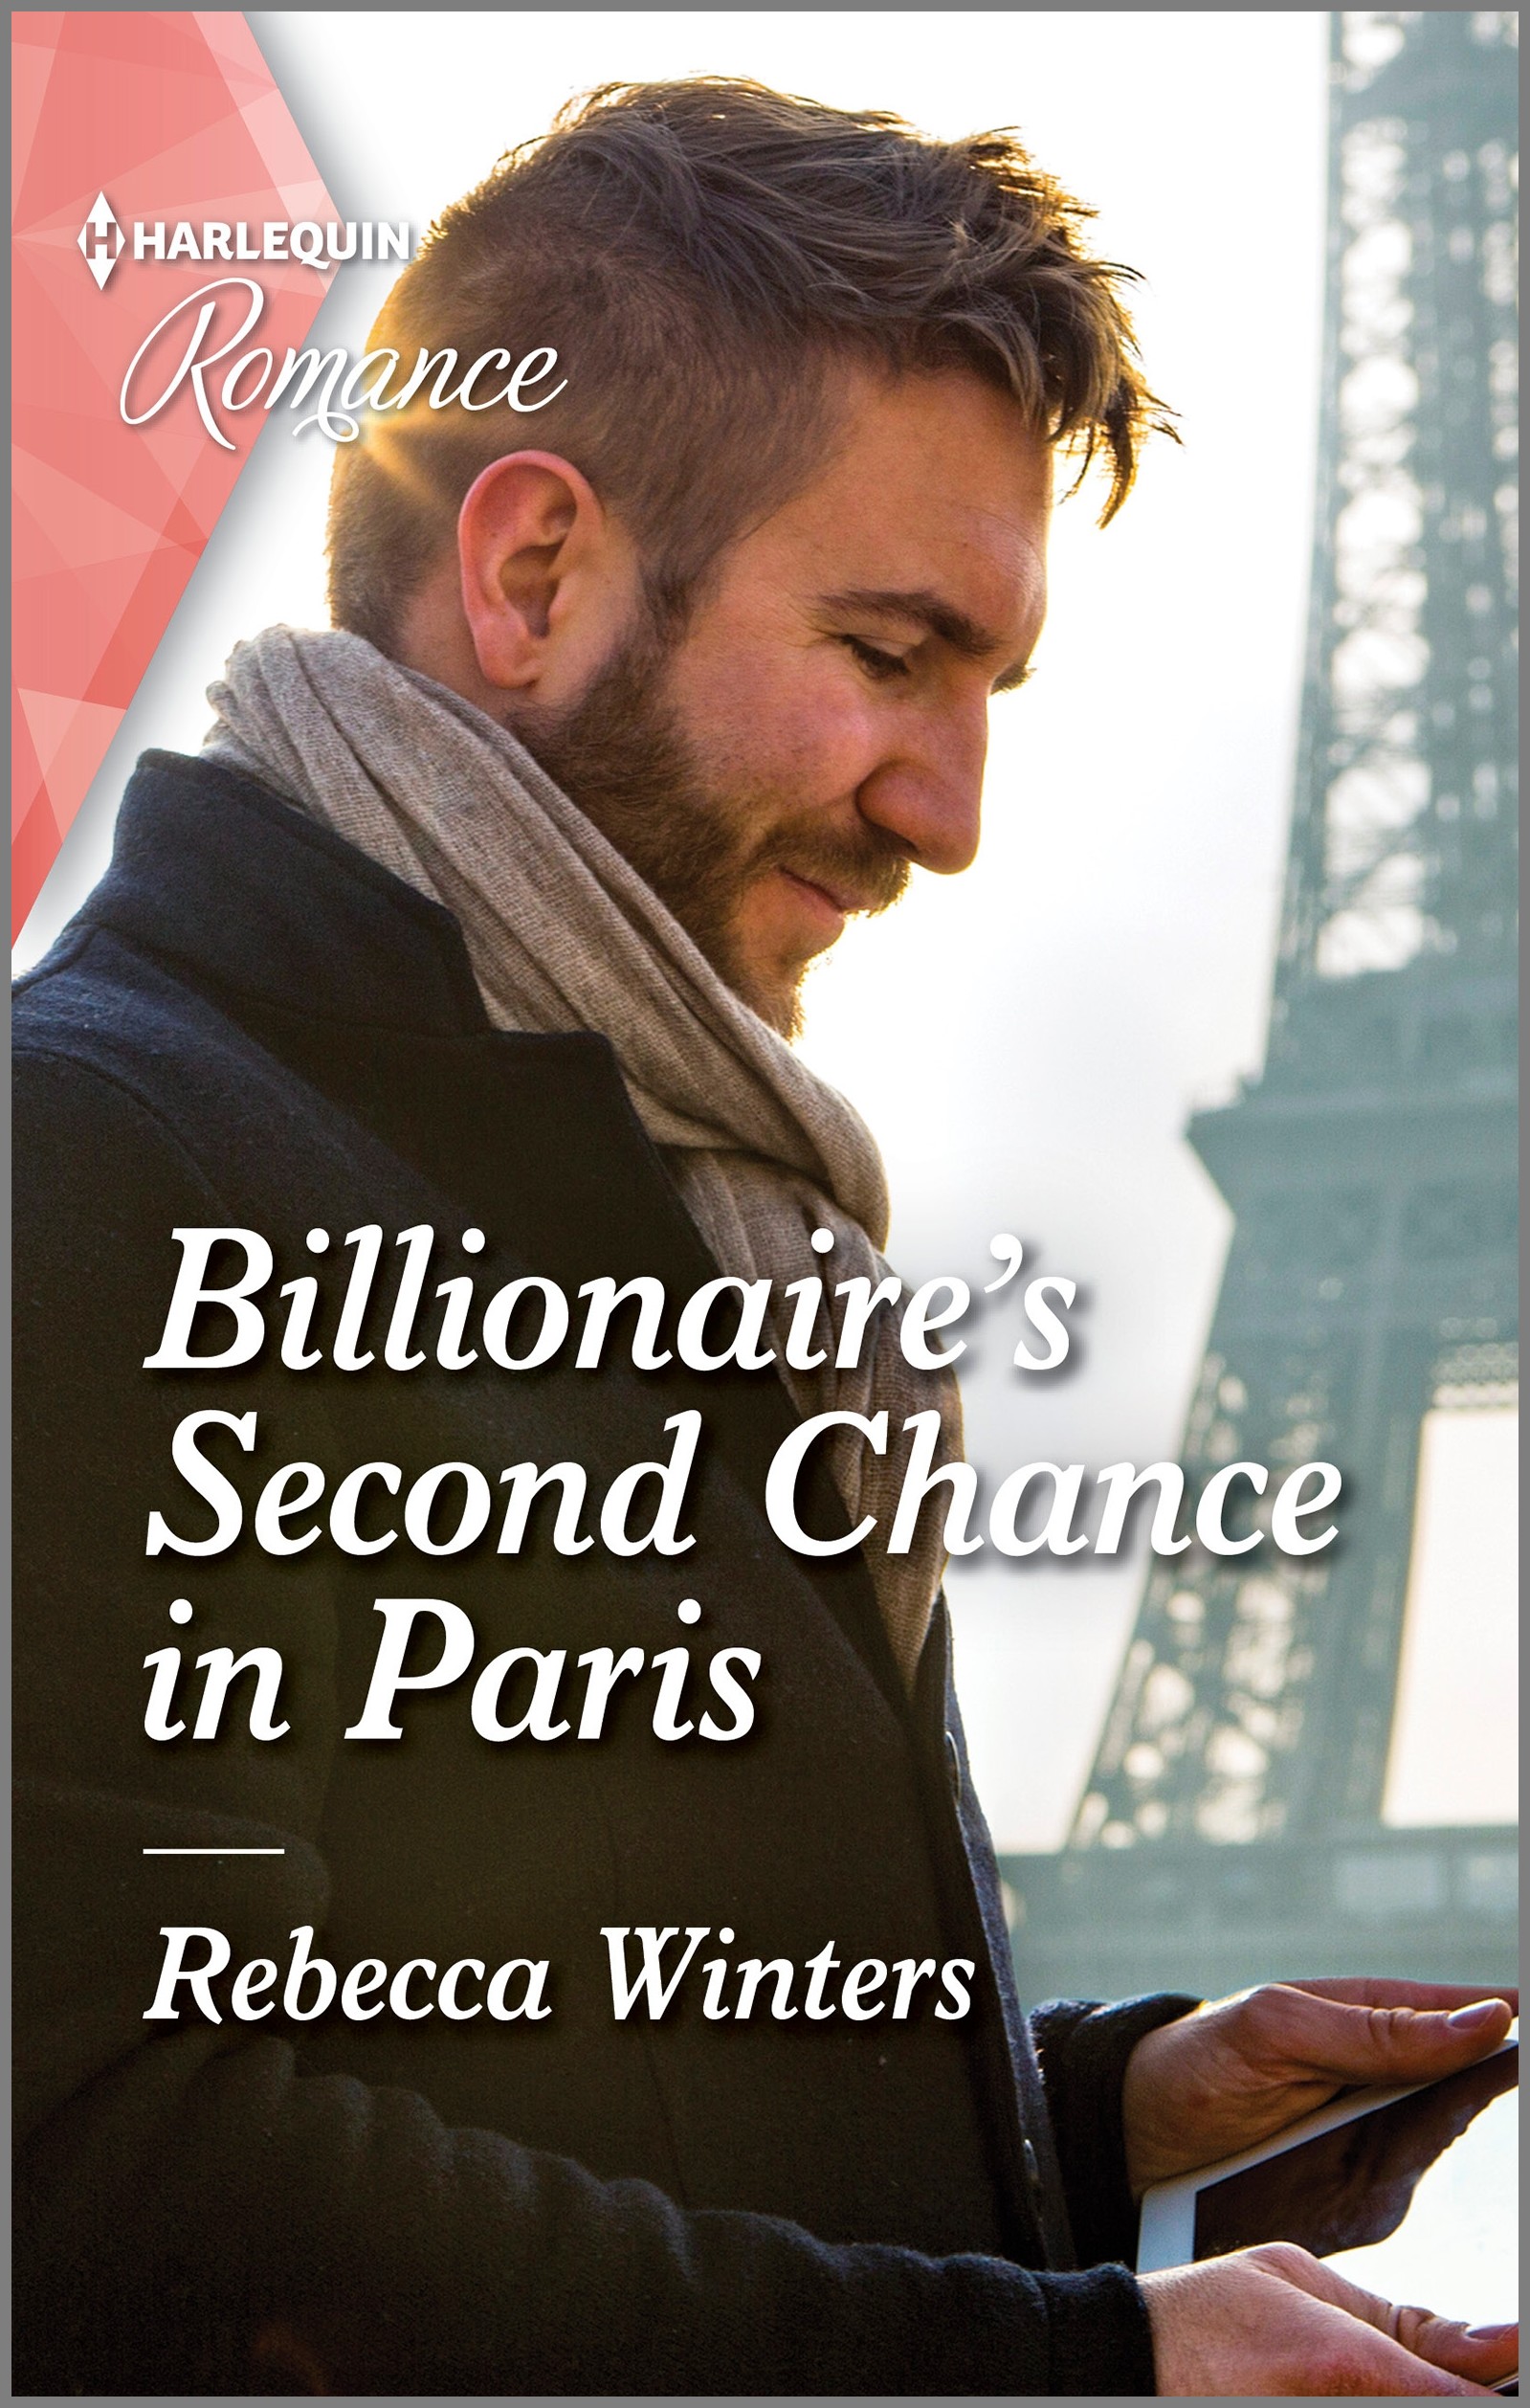 Cover image for BILLIONAIRE'S SECOND CHANCE IN PARIS by Rebecca Winters, featuring a man standing below the Eiffel Tower looking at a tablet.